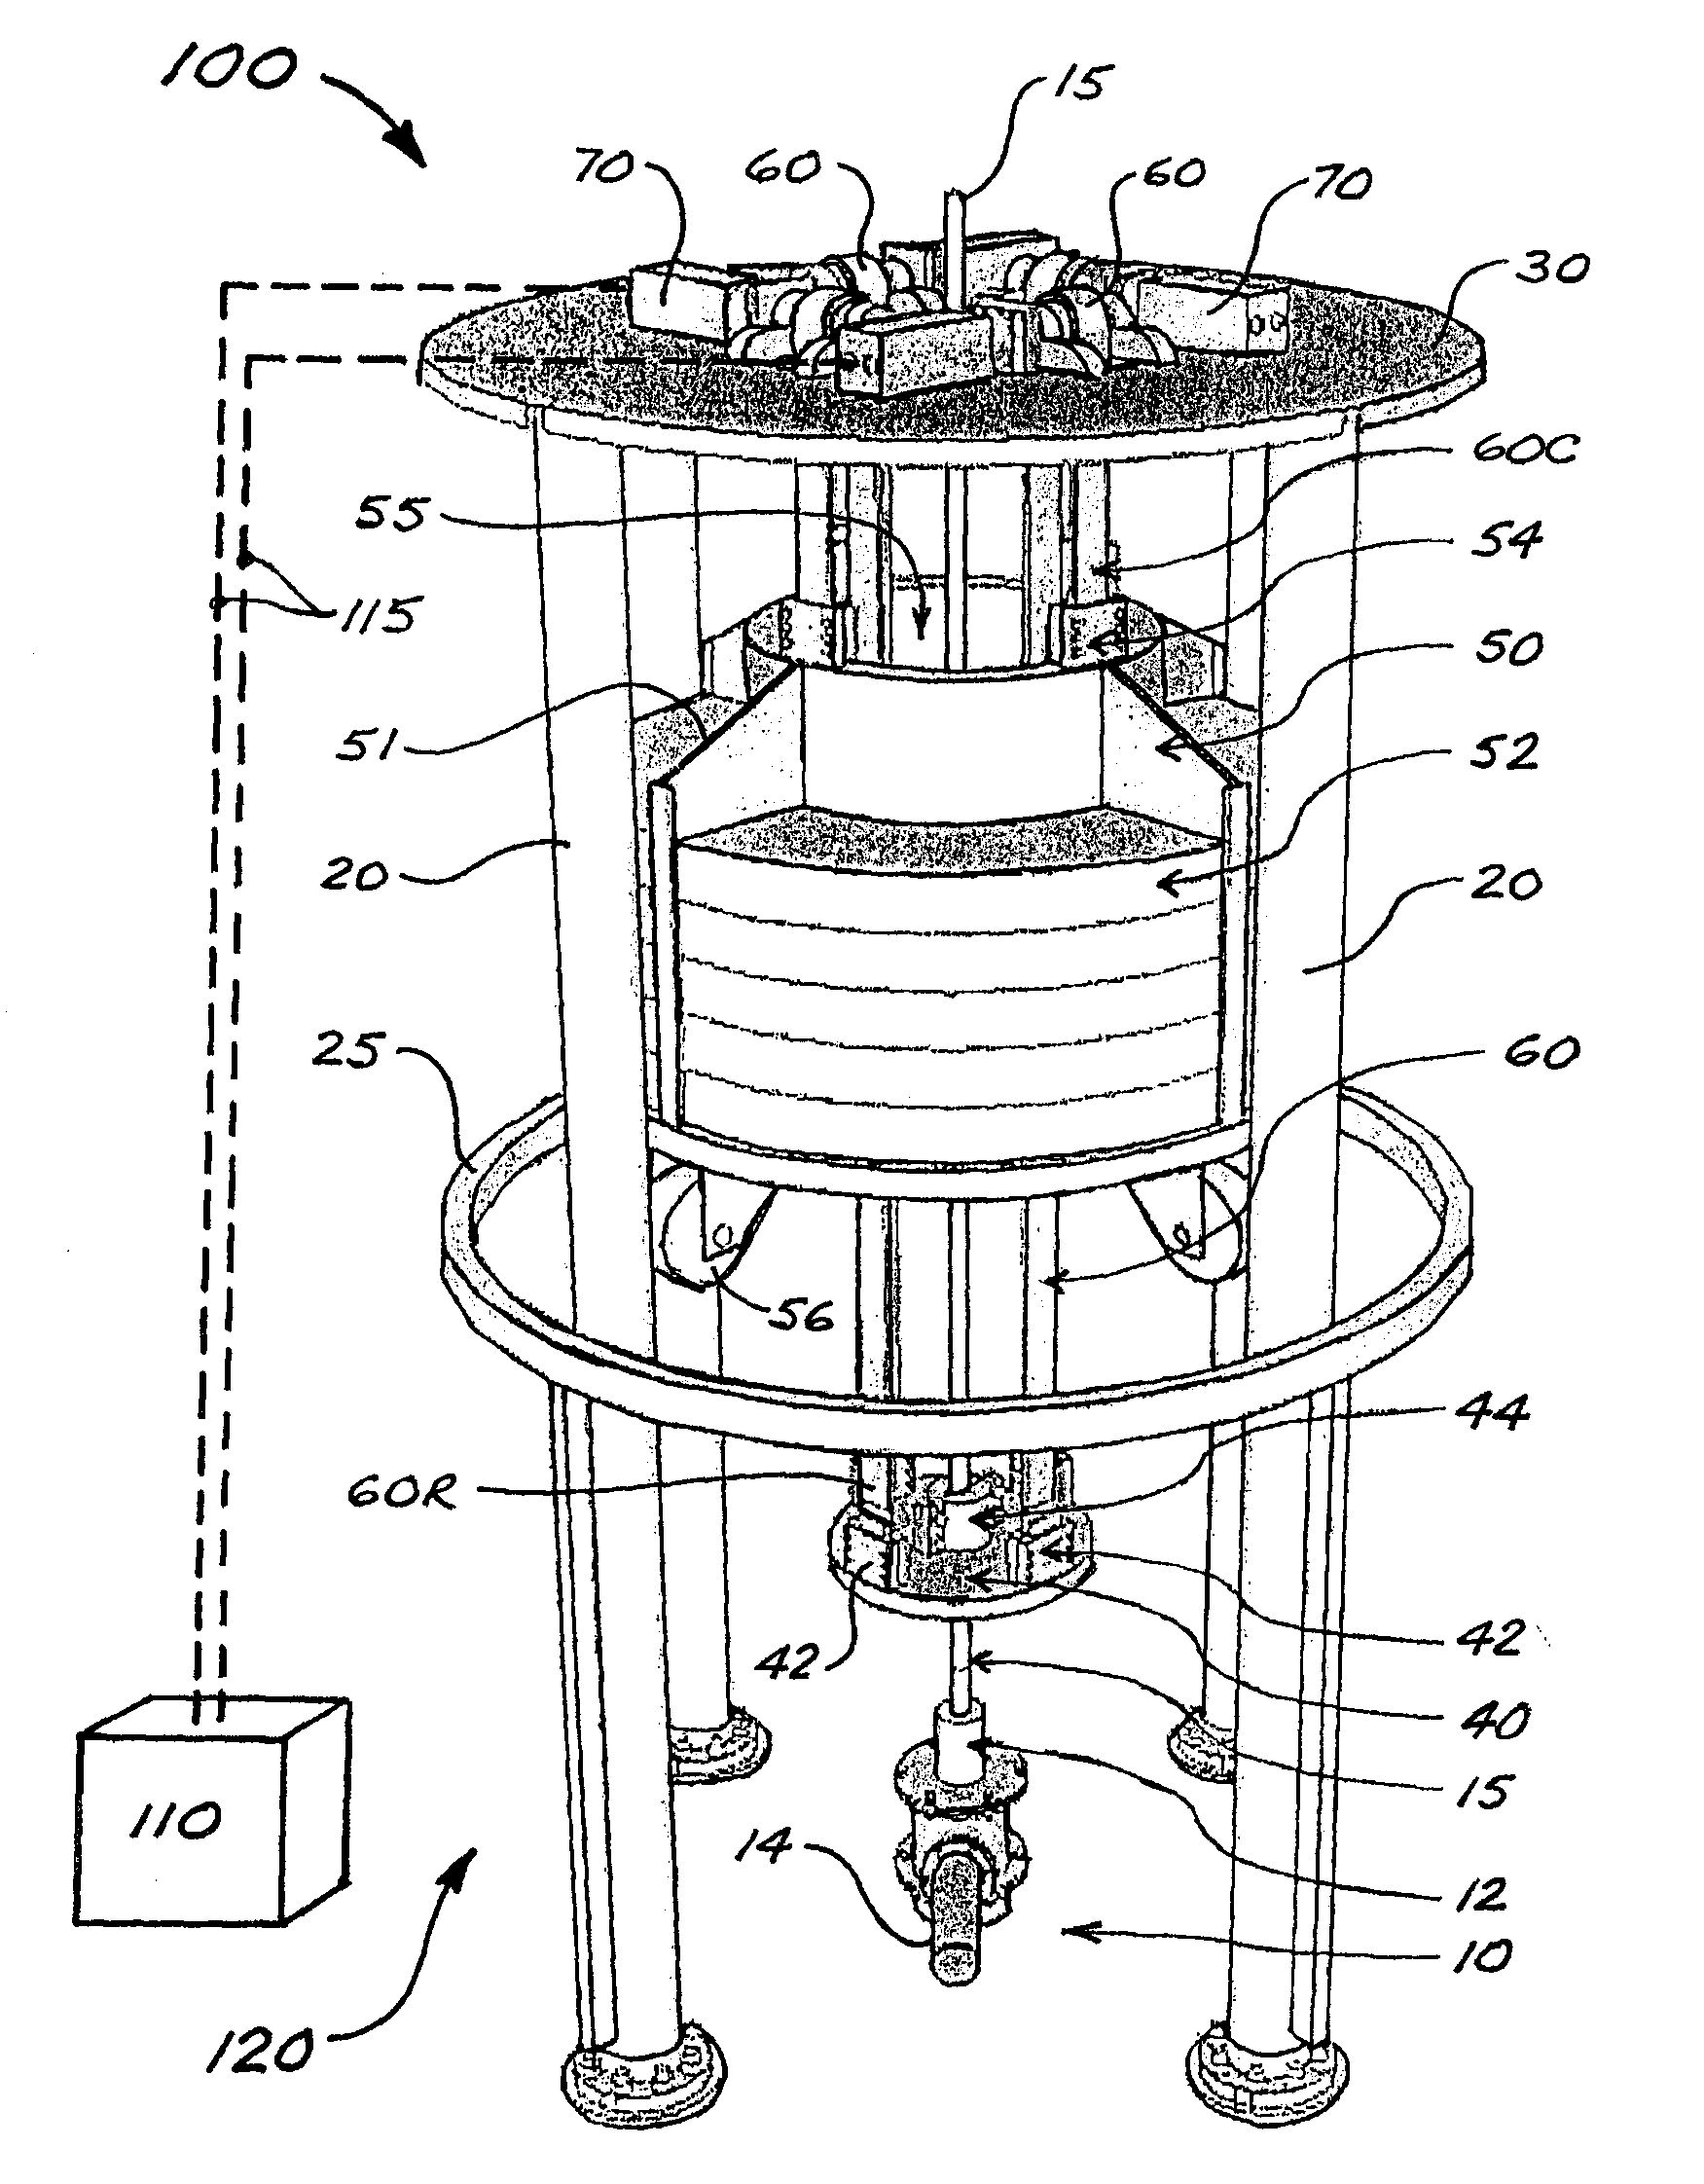 Counterweighted pump jack with reversible motors